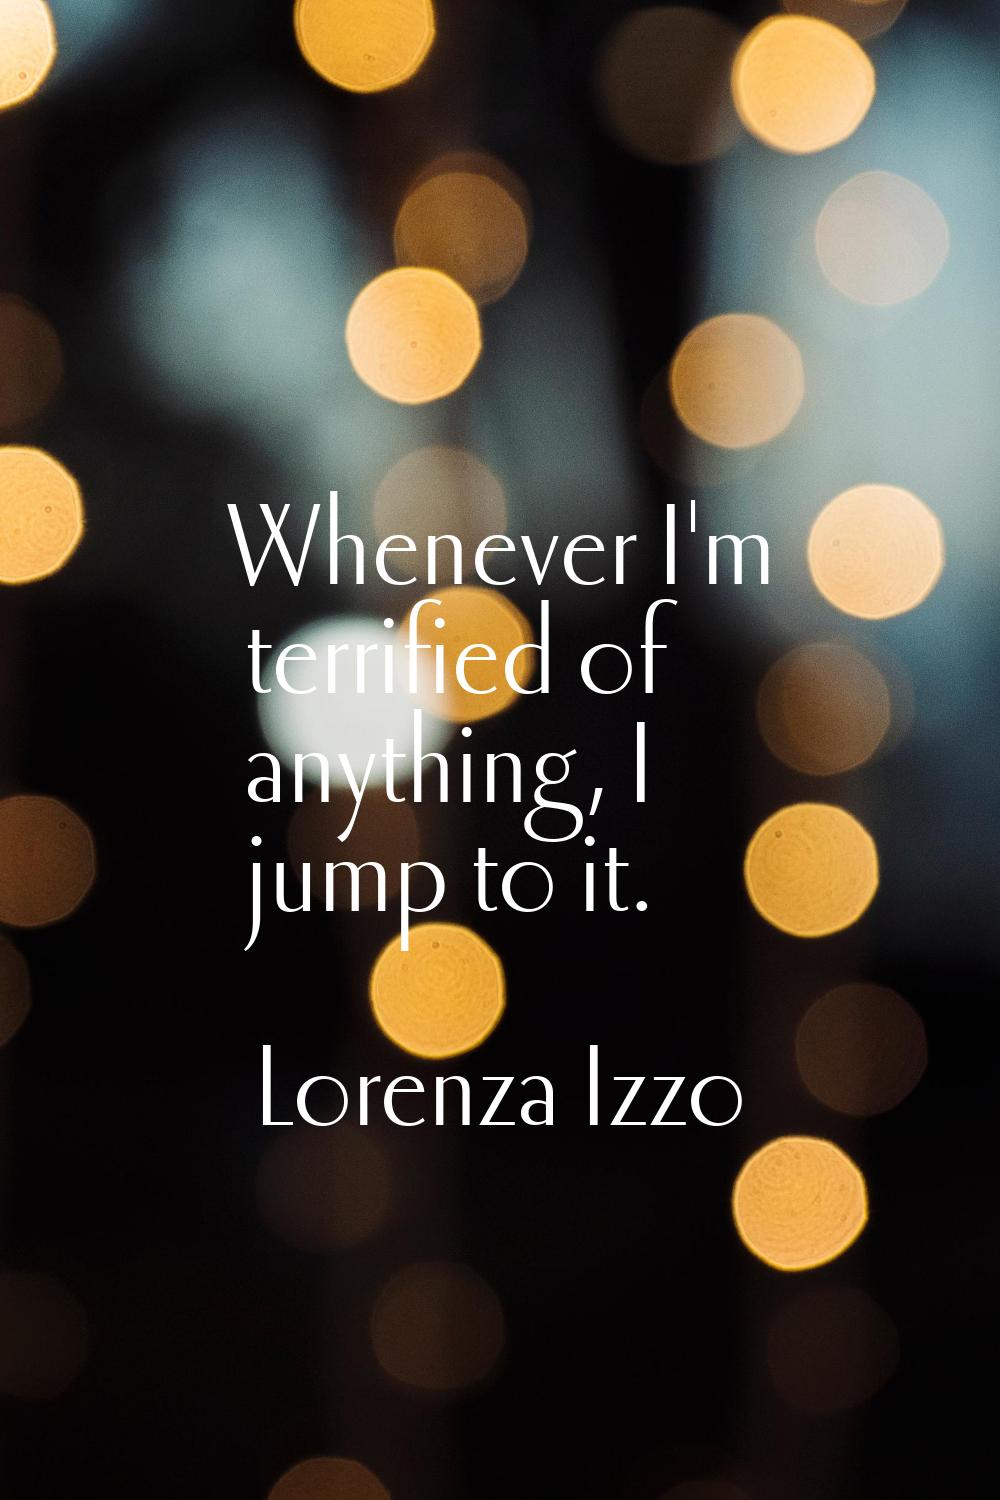 Whenever I'm terrified of anything, I jump to it.